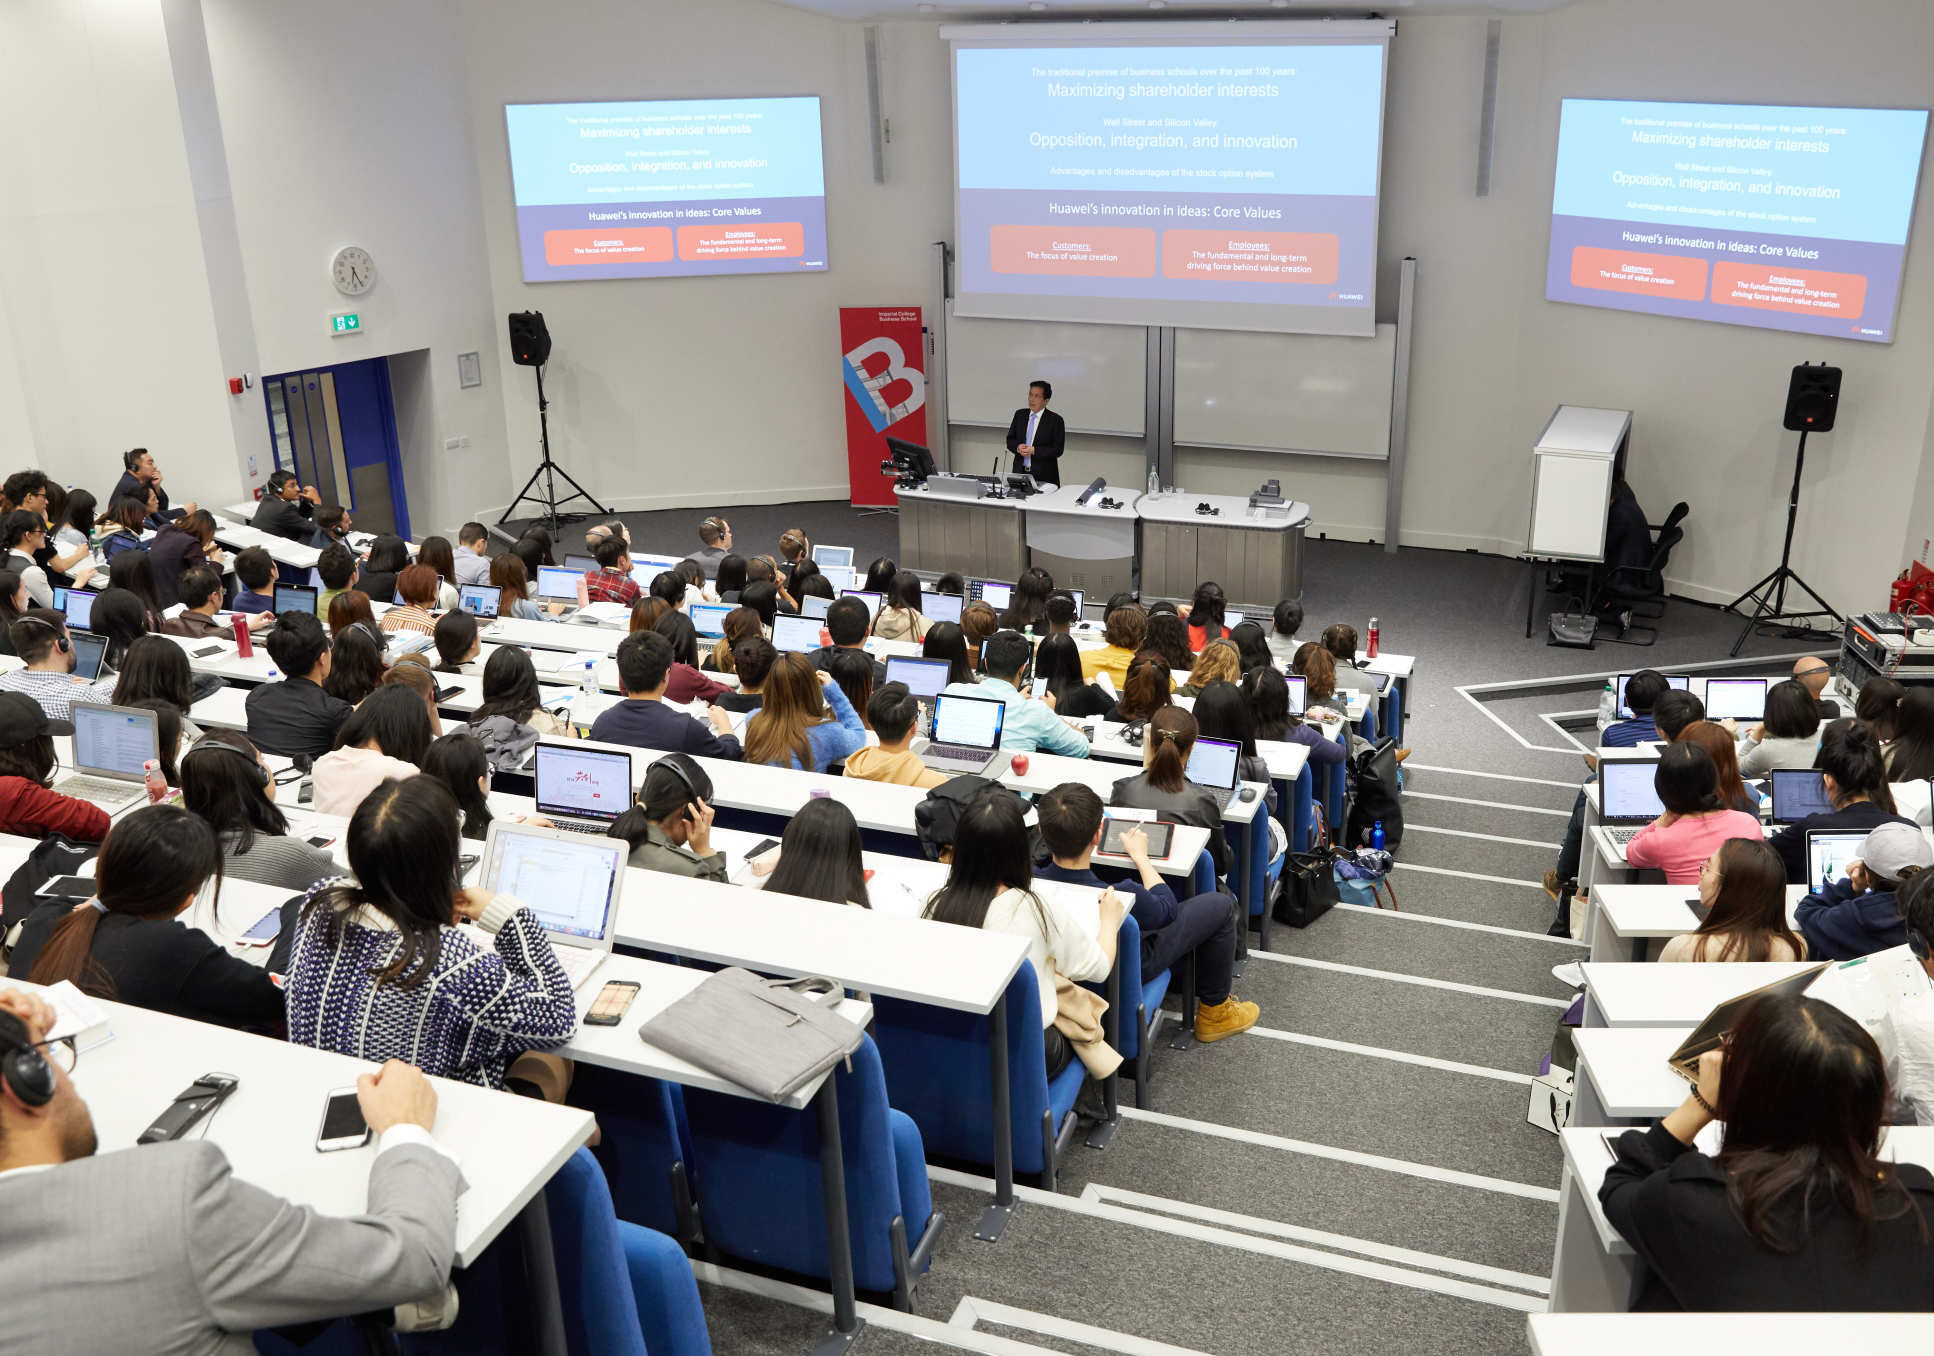 Professor Tian gave insights into Huawei's success to Business School students